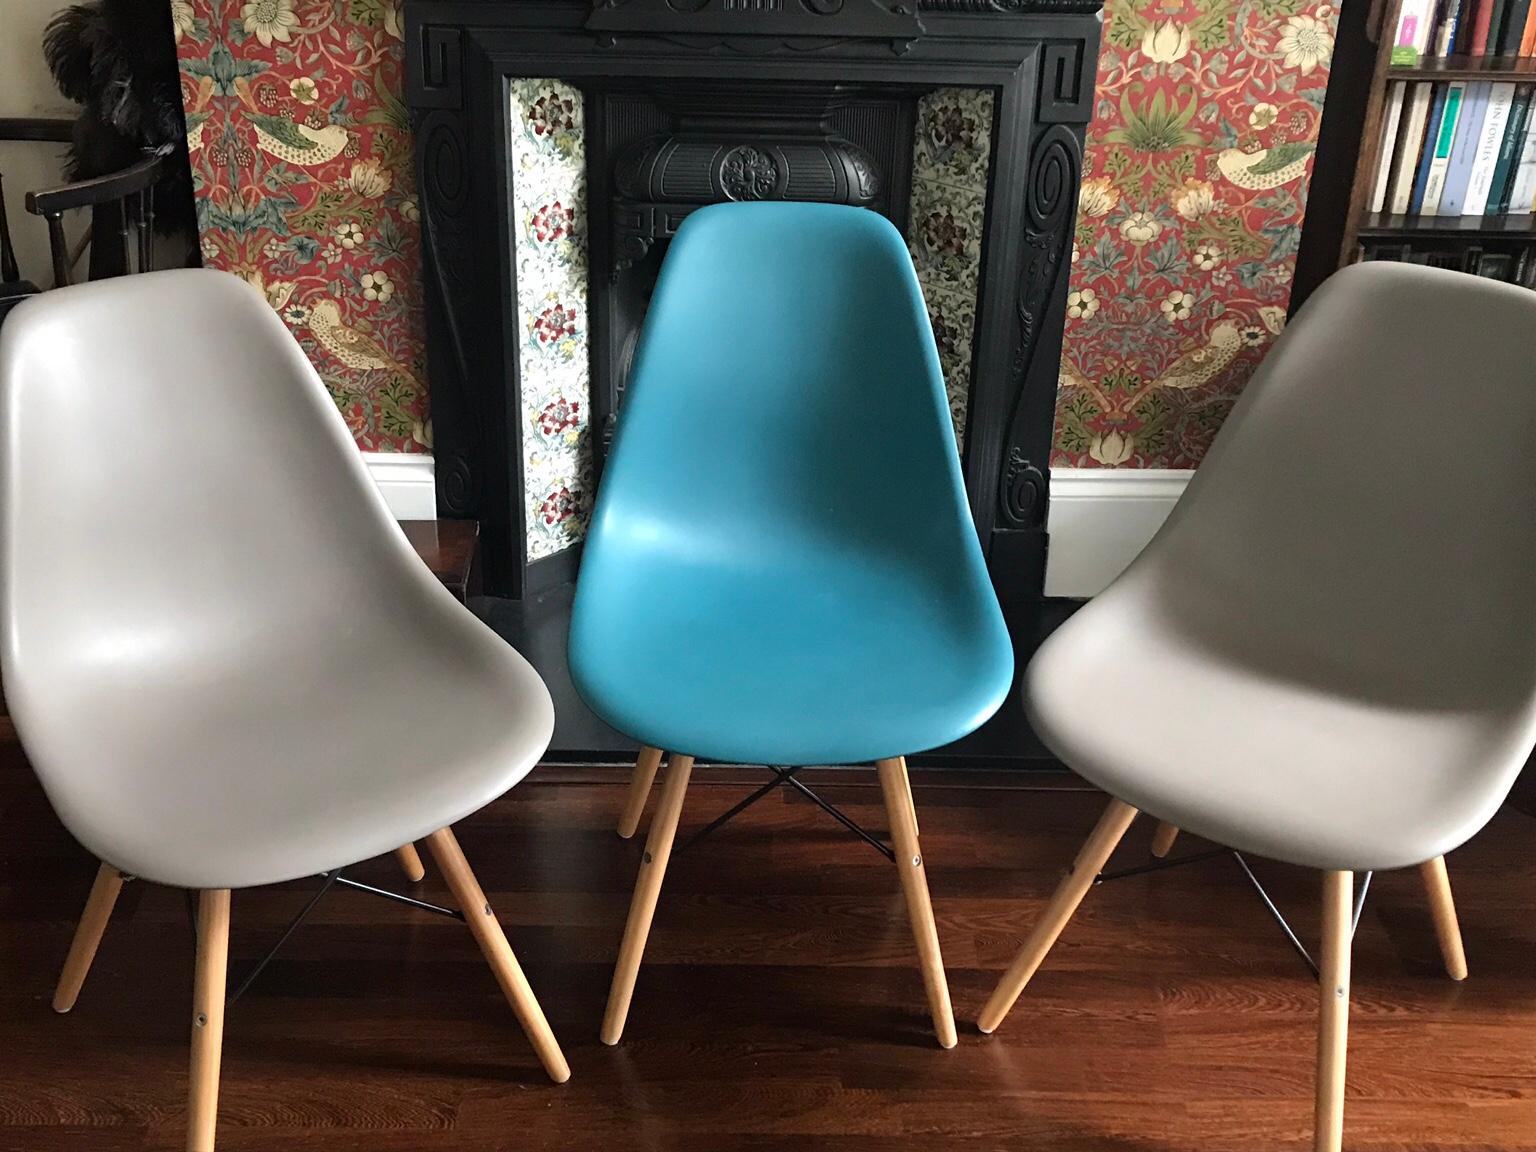 Dwell Chairs 4 2 Grey 2 Turquoise In Ig1 London Fur 80 00 Zum